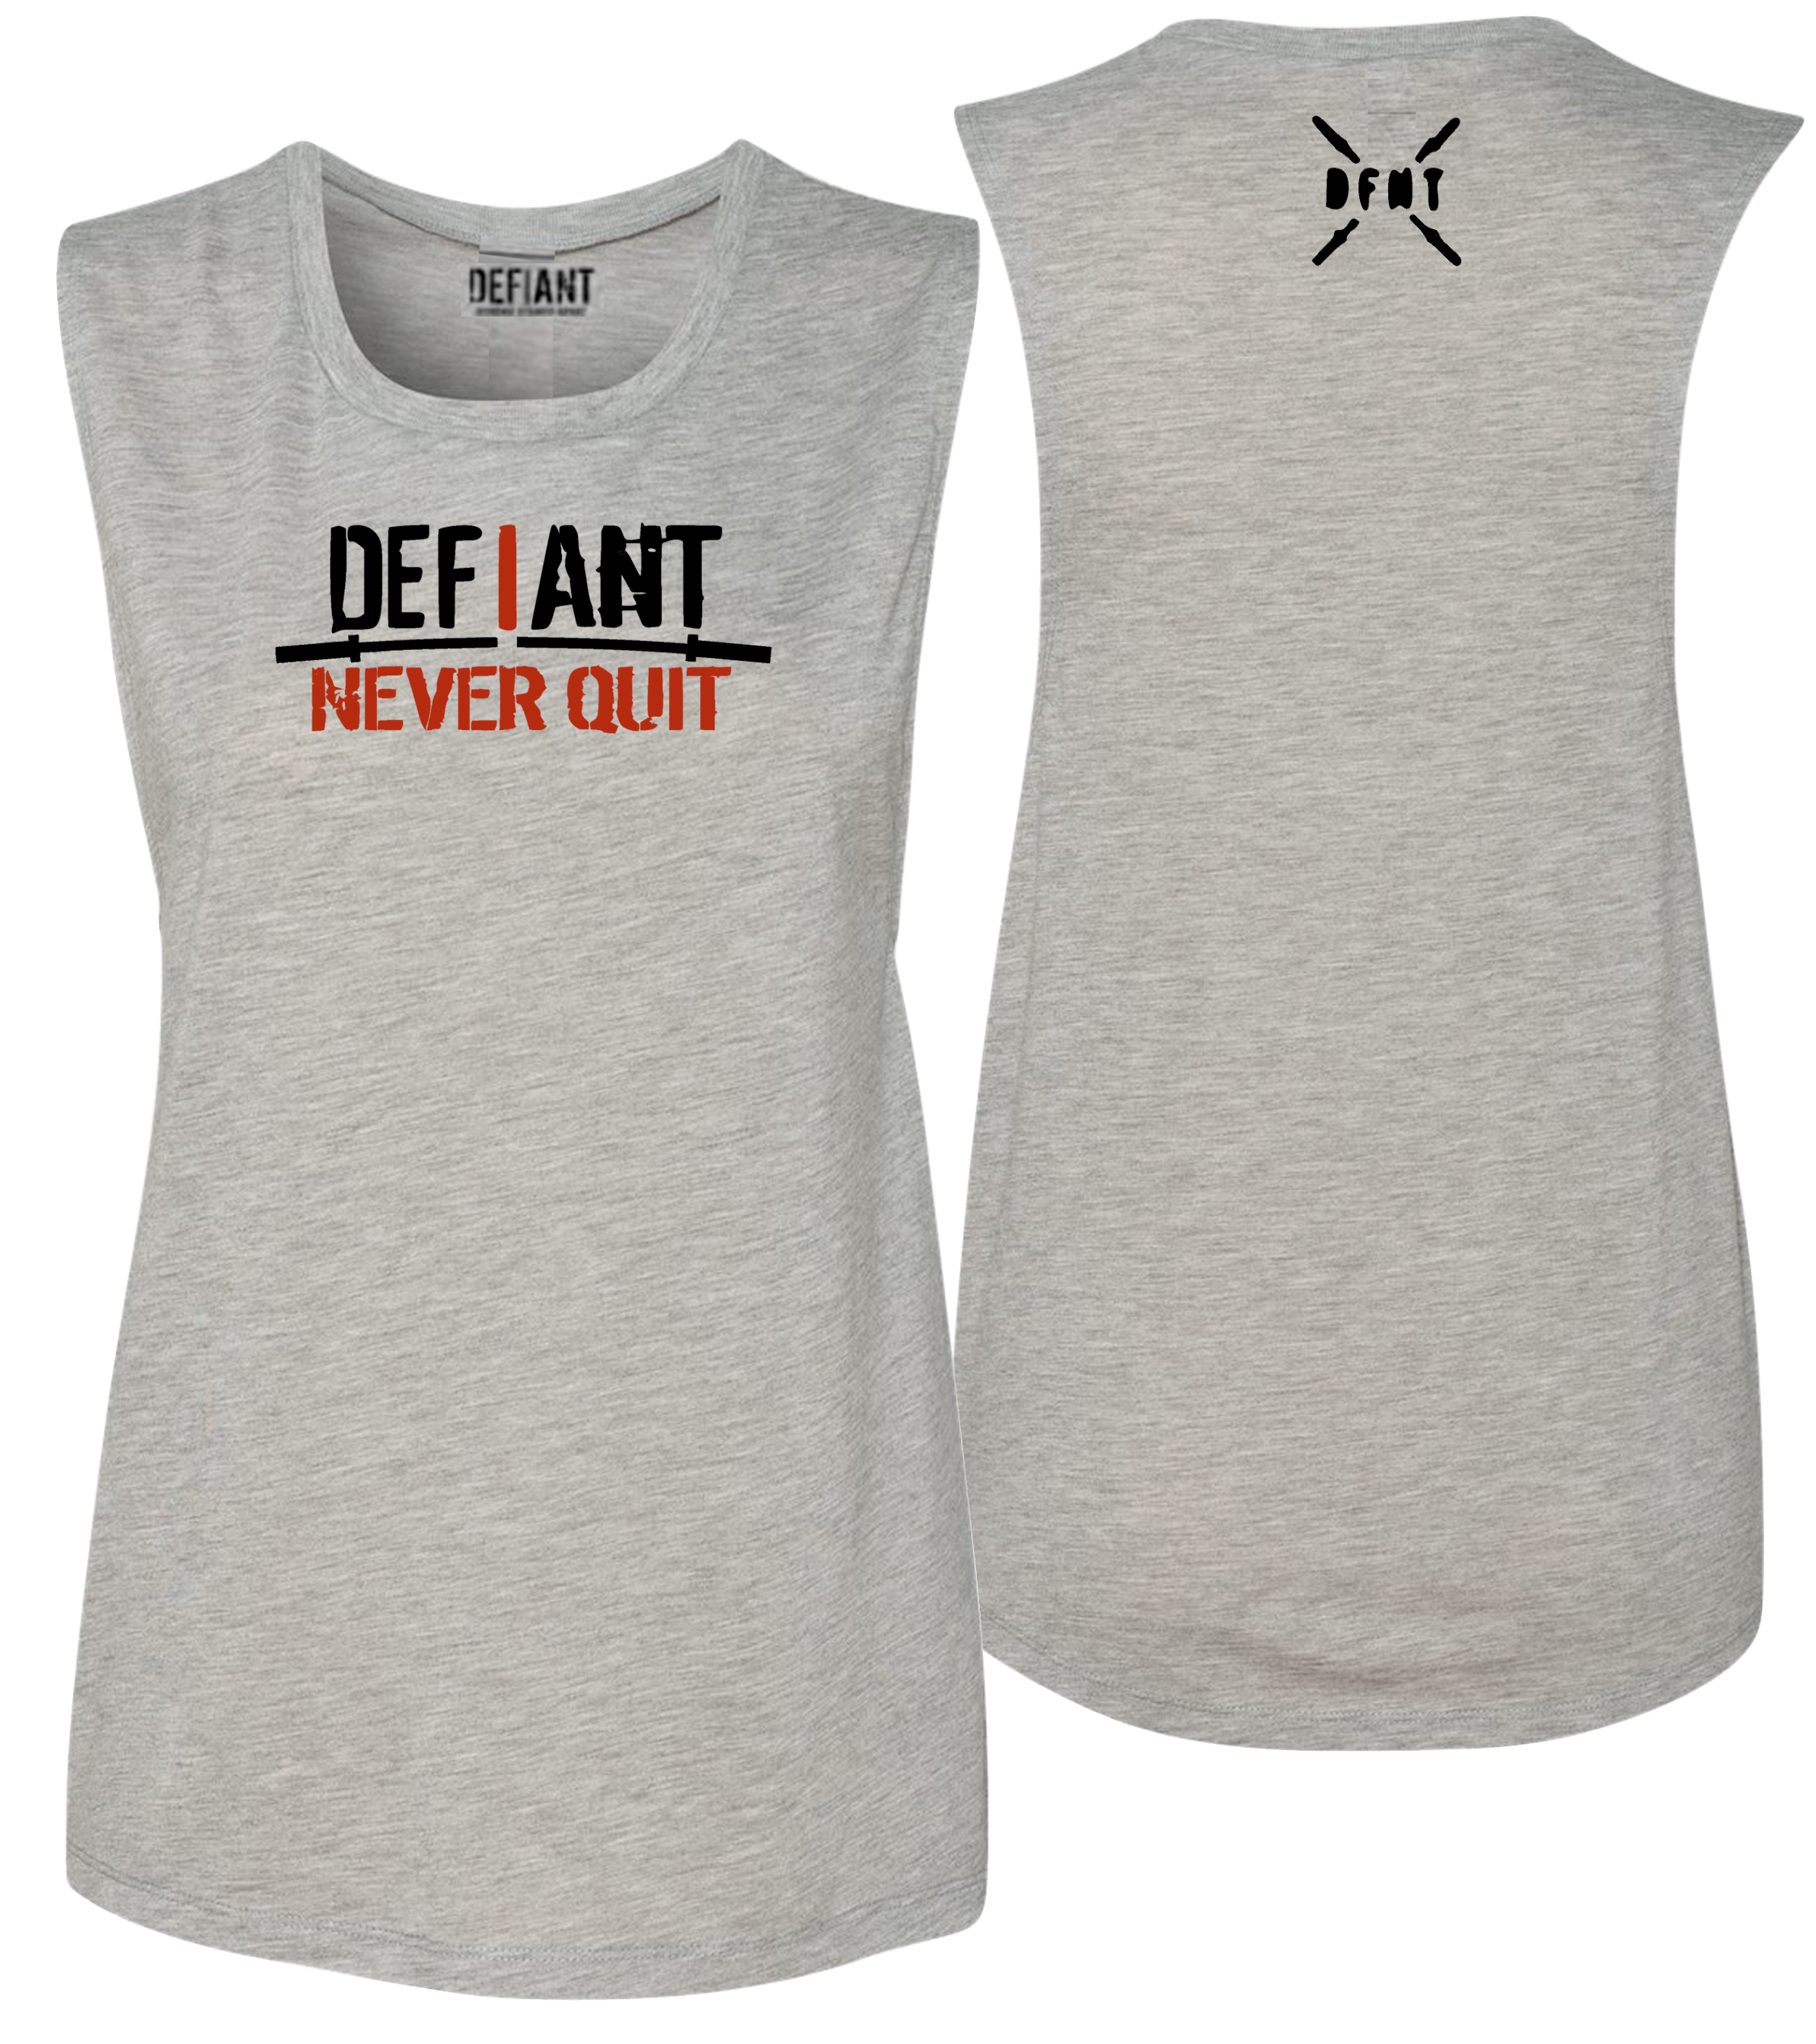 New - "I NEVER QUIT" - Women's Muscle Tank